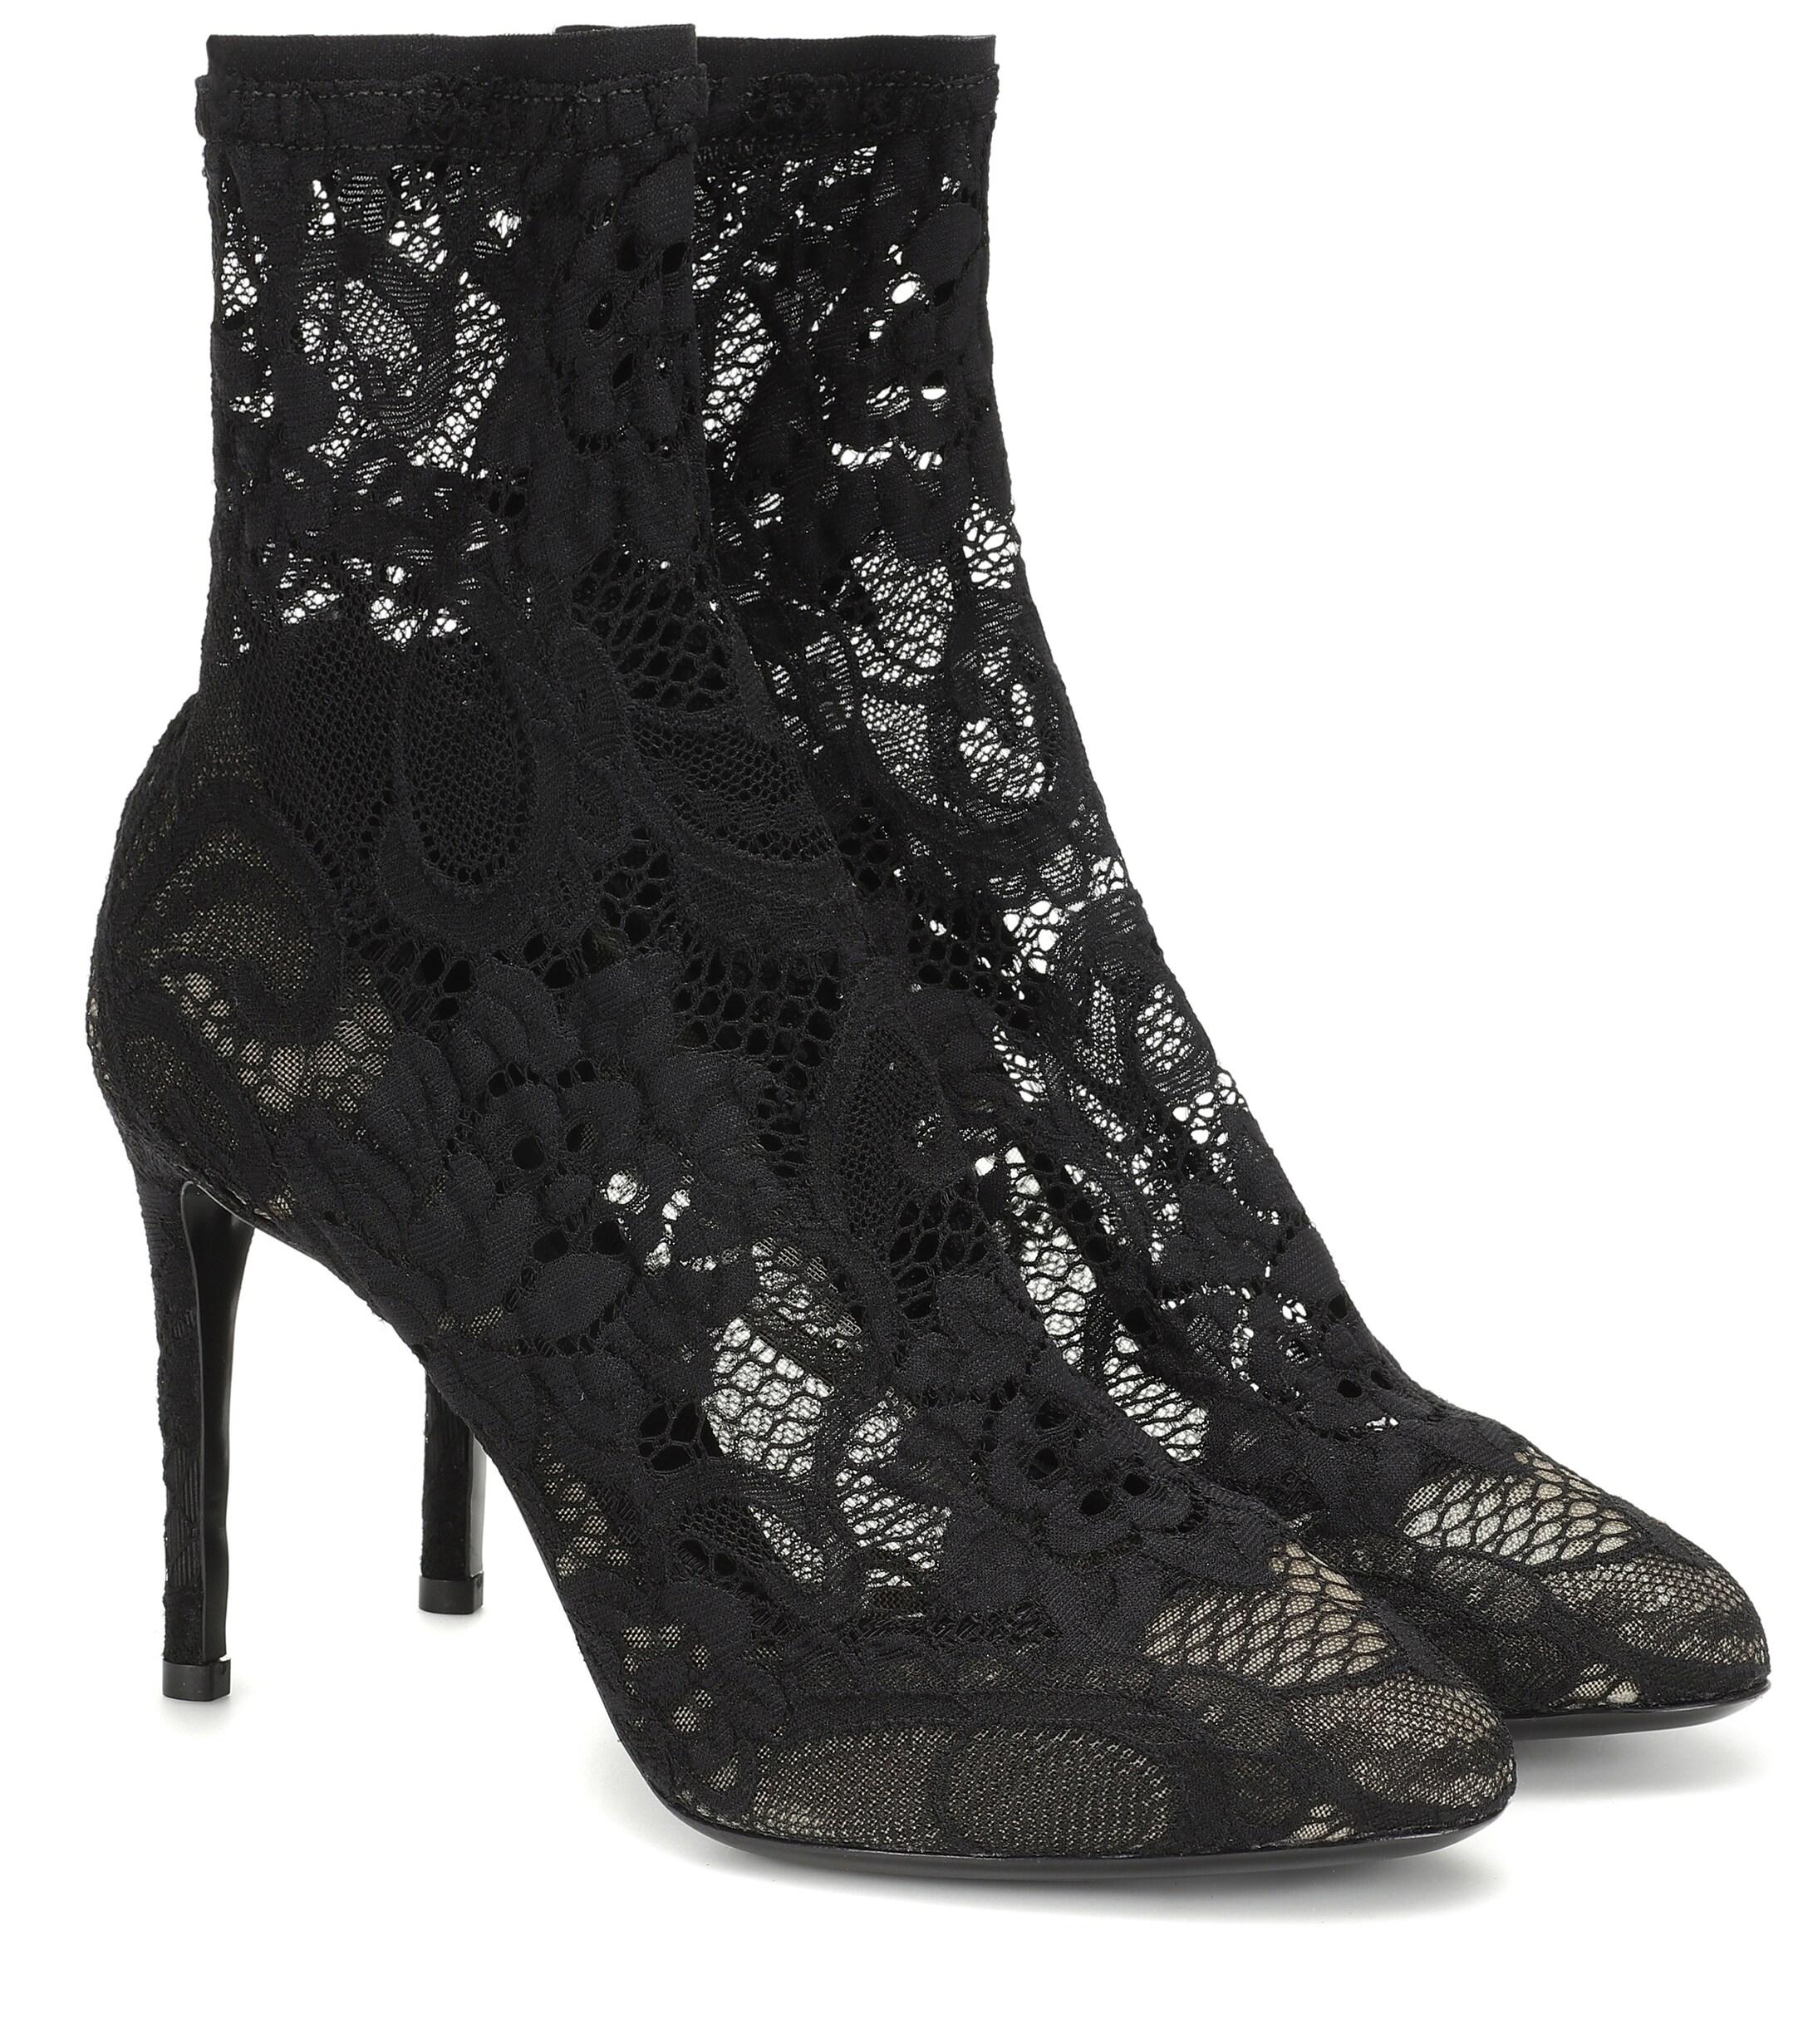 Dolce & Gabbana Stretch-lace Ankle Boots in Black - Lyst